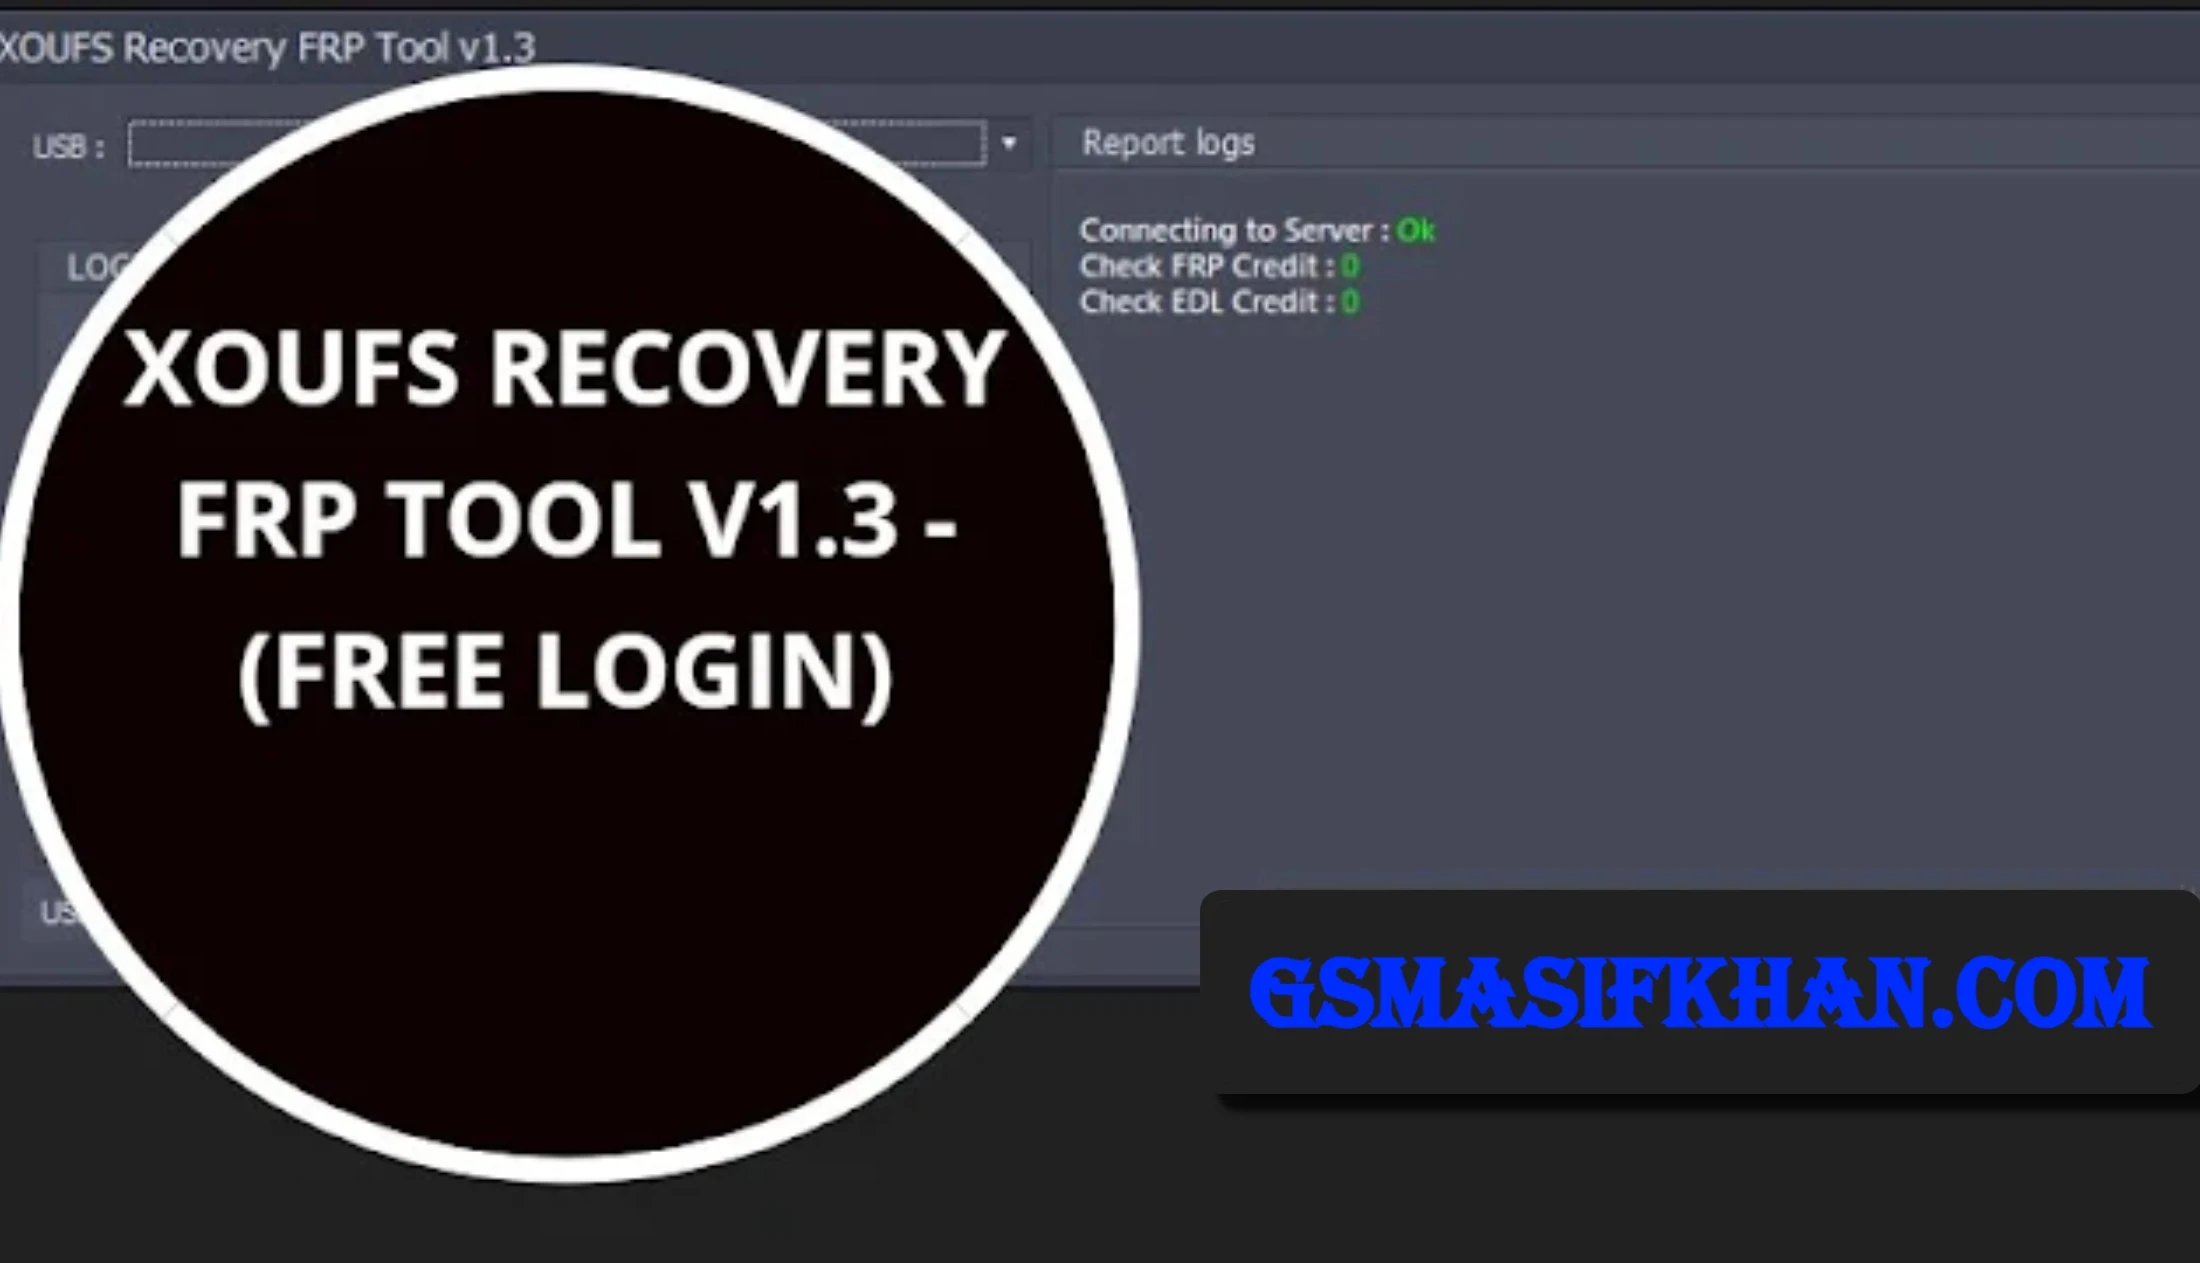 XOUFS Recovery FRP Tool V1.3